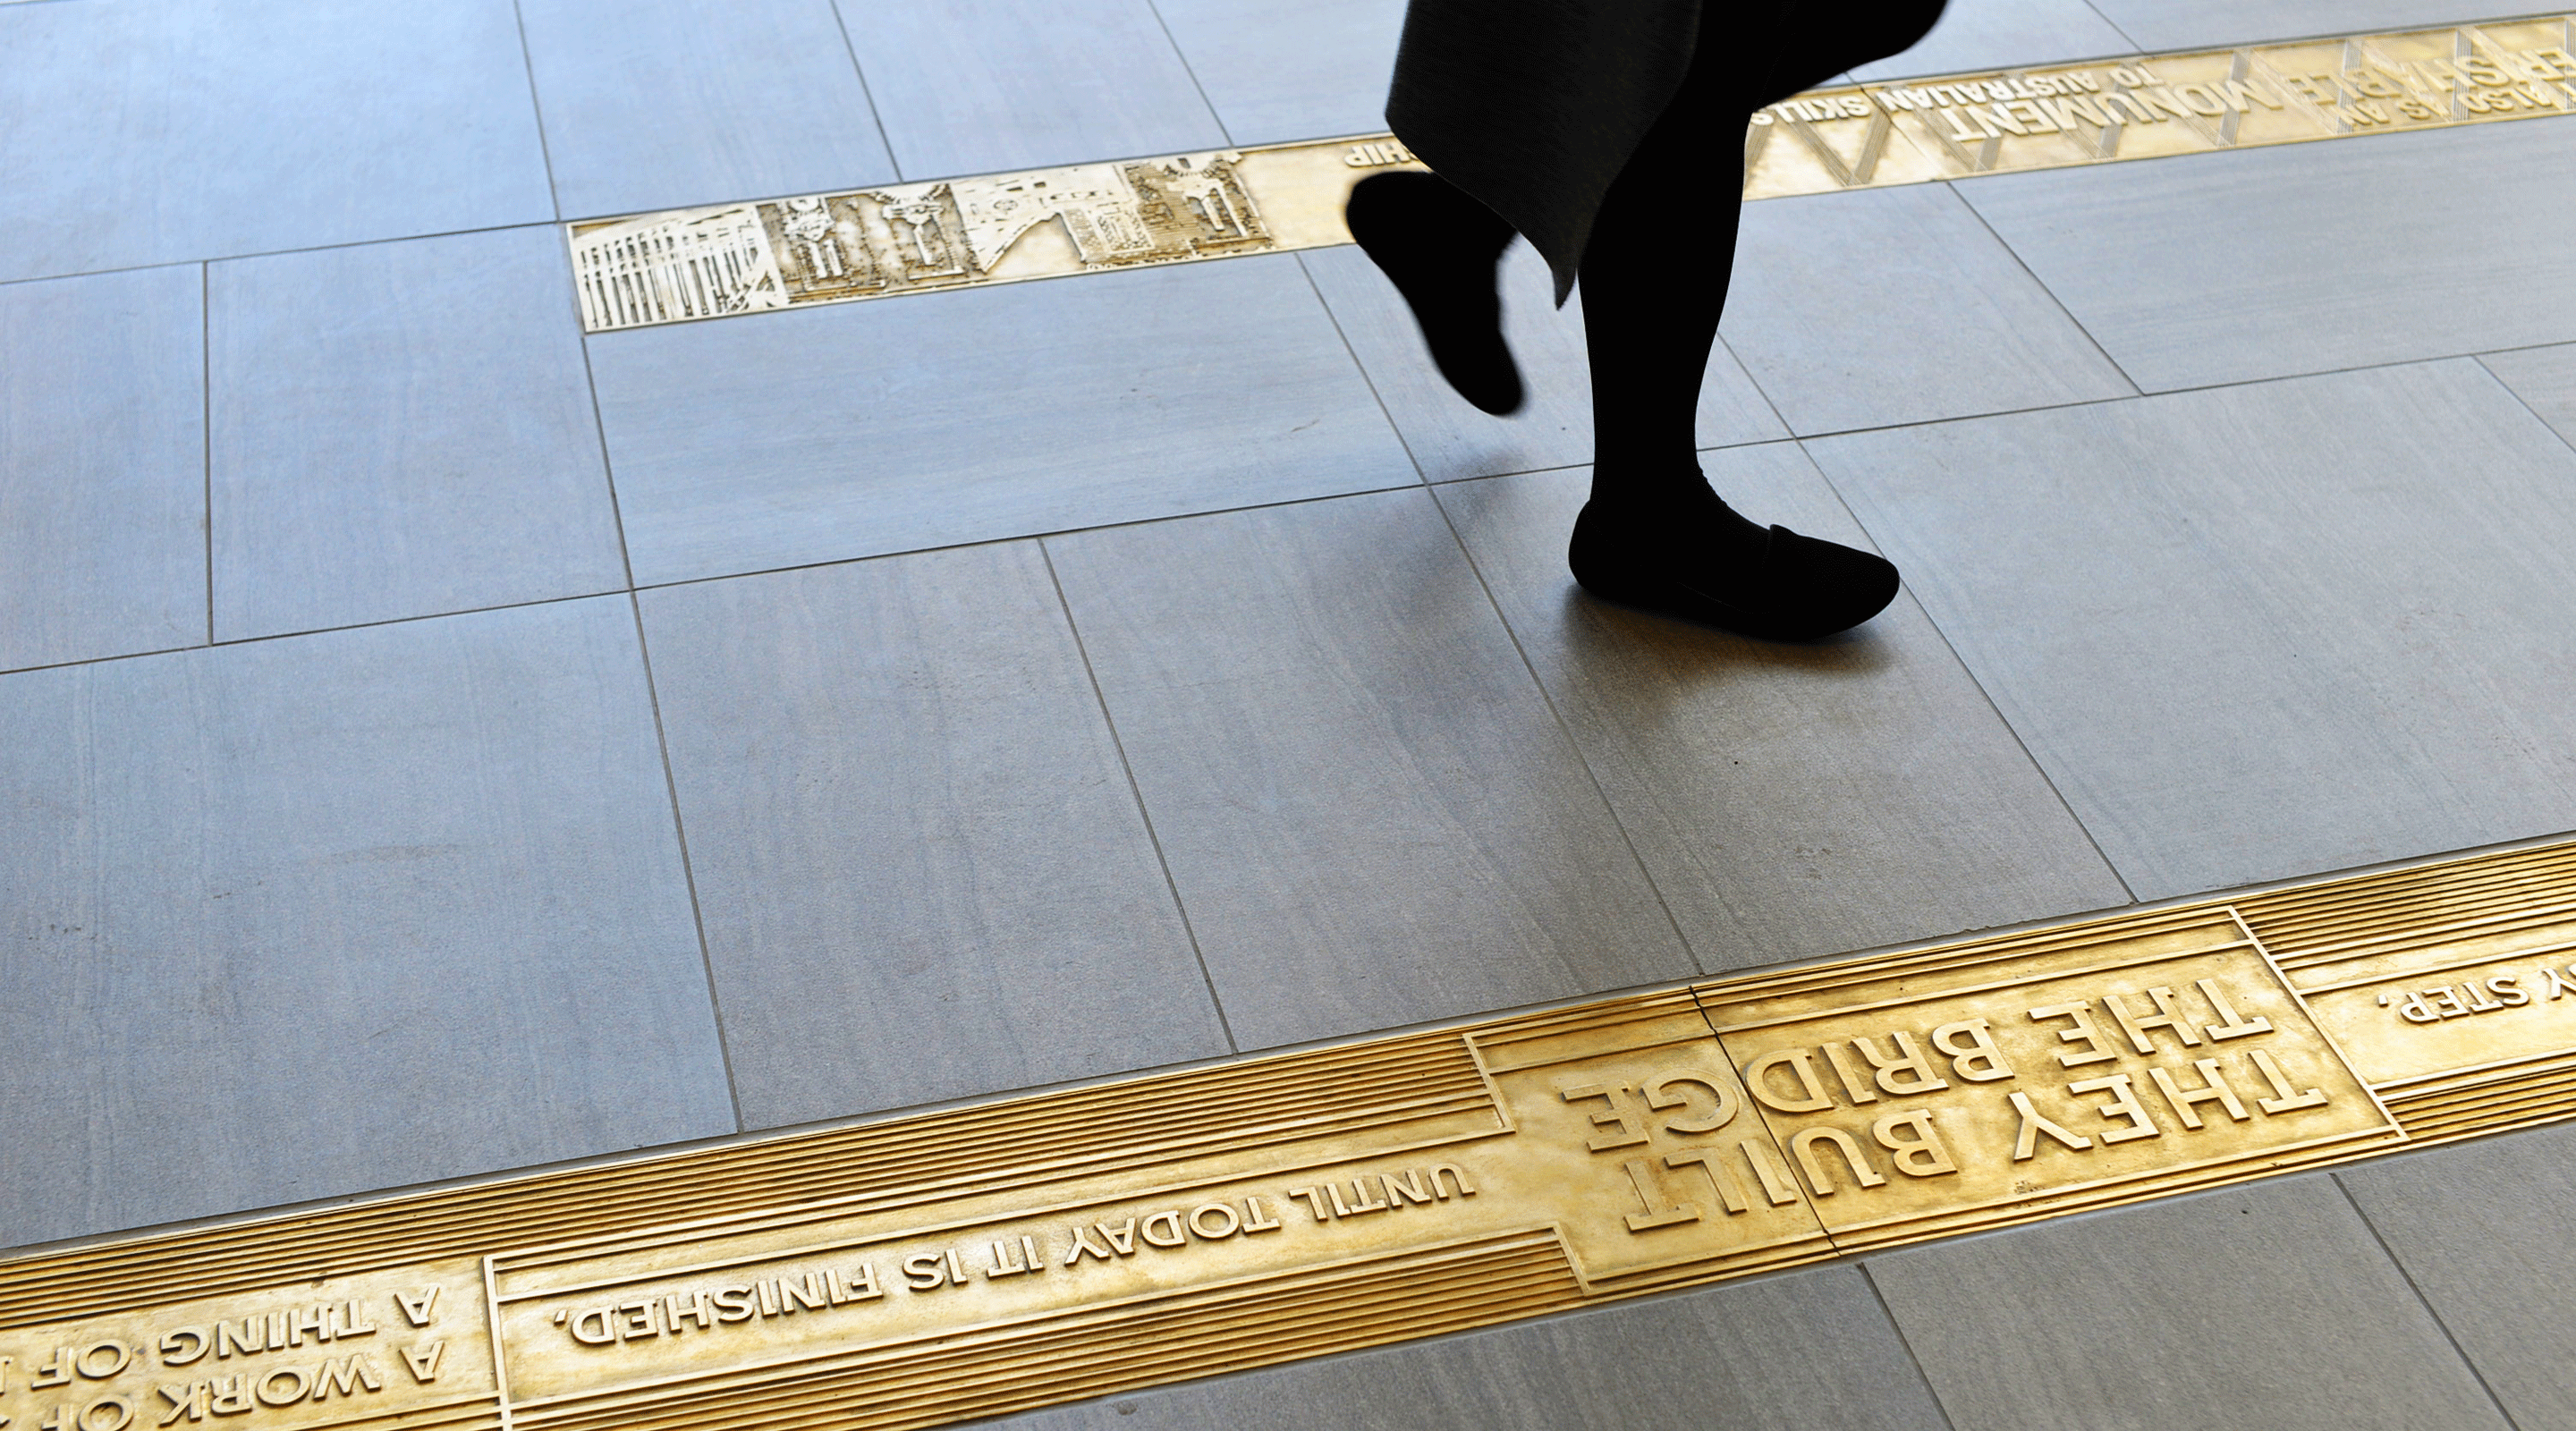 Photograph showing woman walking across ground inlays in Ennis Road Bays RMS headquarters.